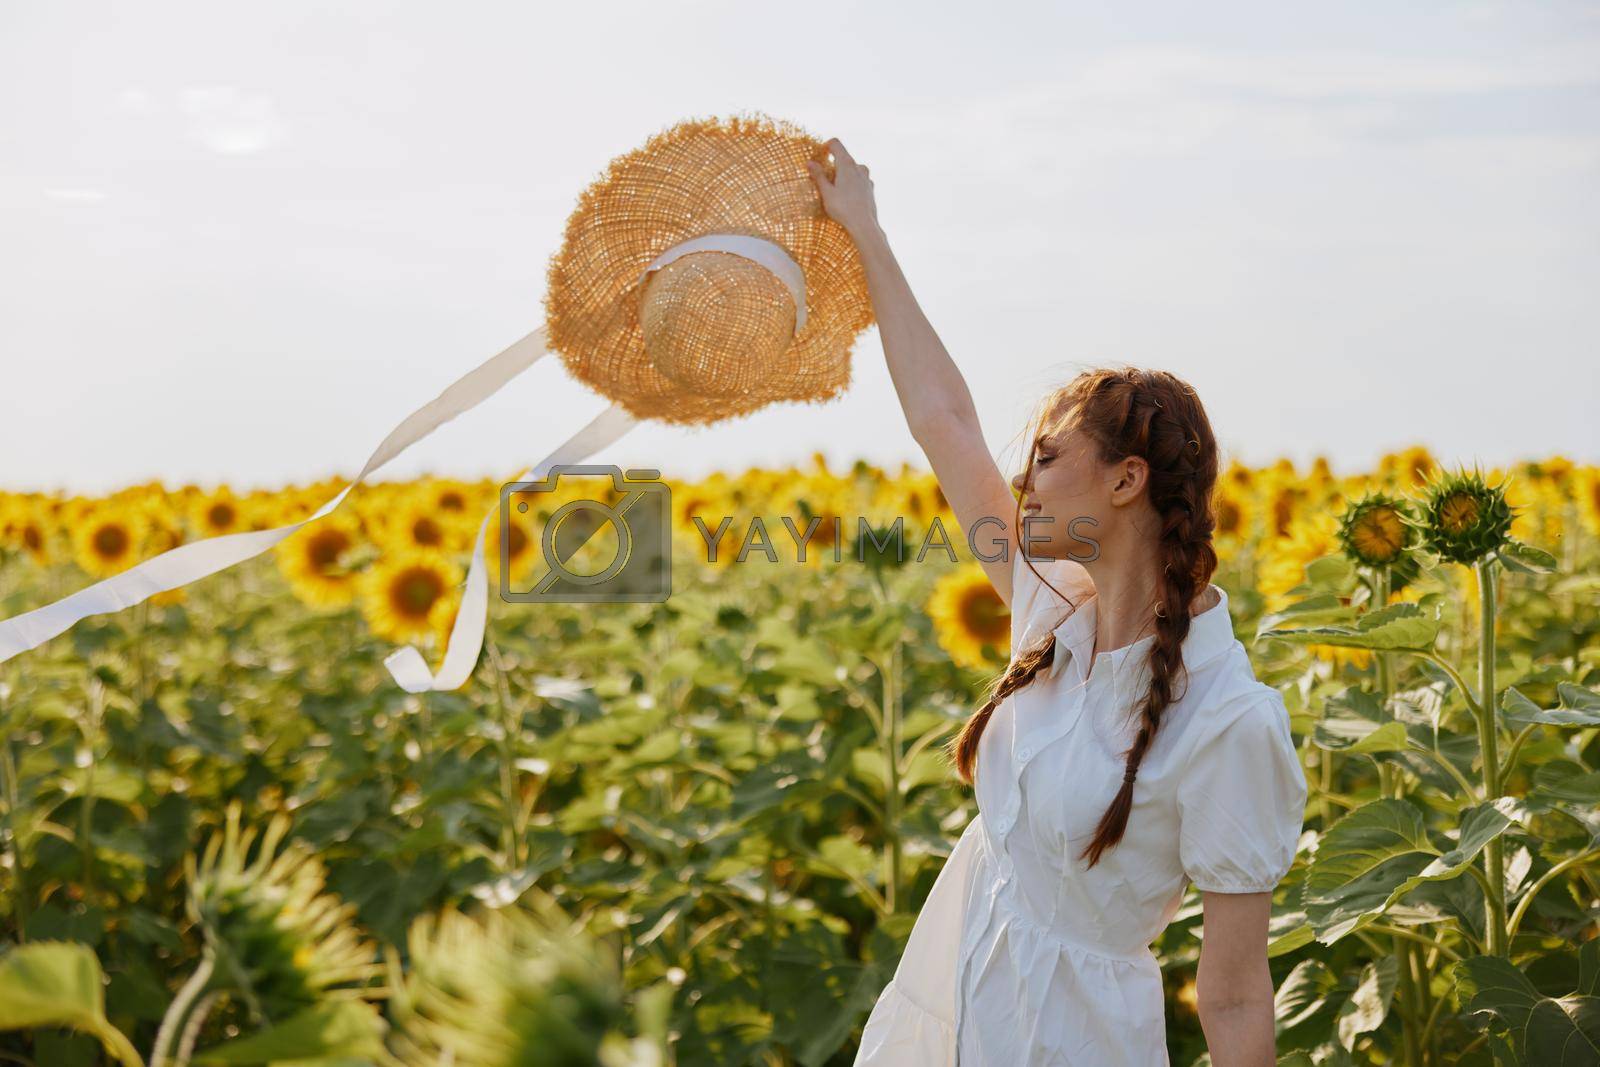 woman with pigtails In a field with blooming sunflowers landscape. High quality photo